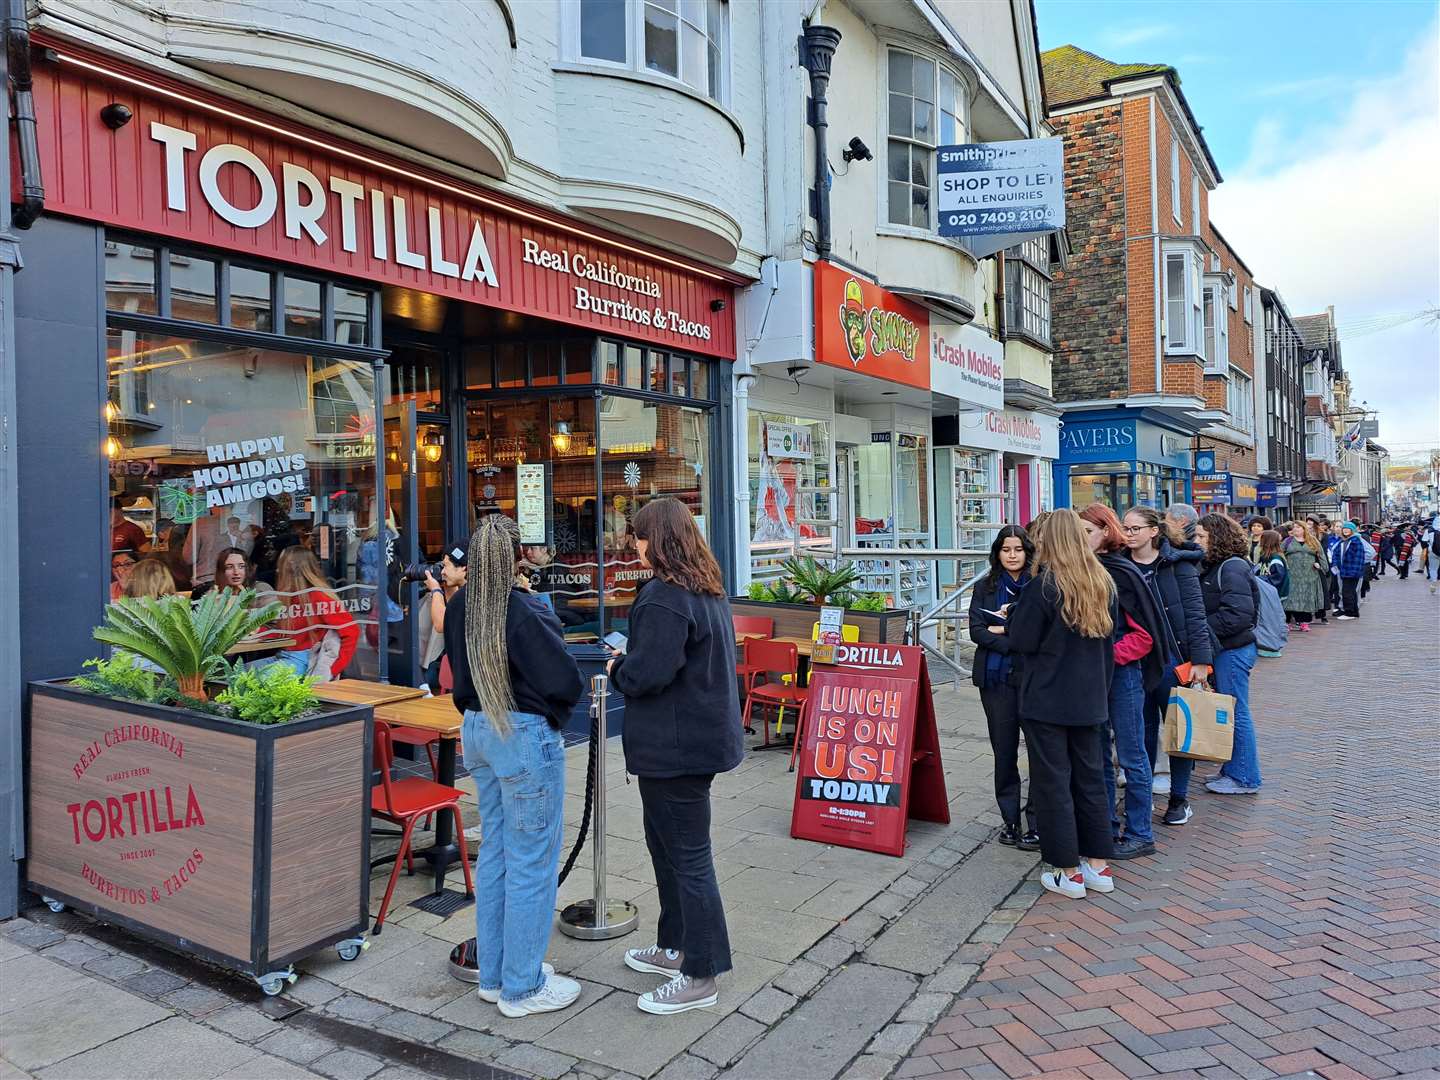 Tortilla's launch in Canterbury high street has drawn huge crowds